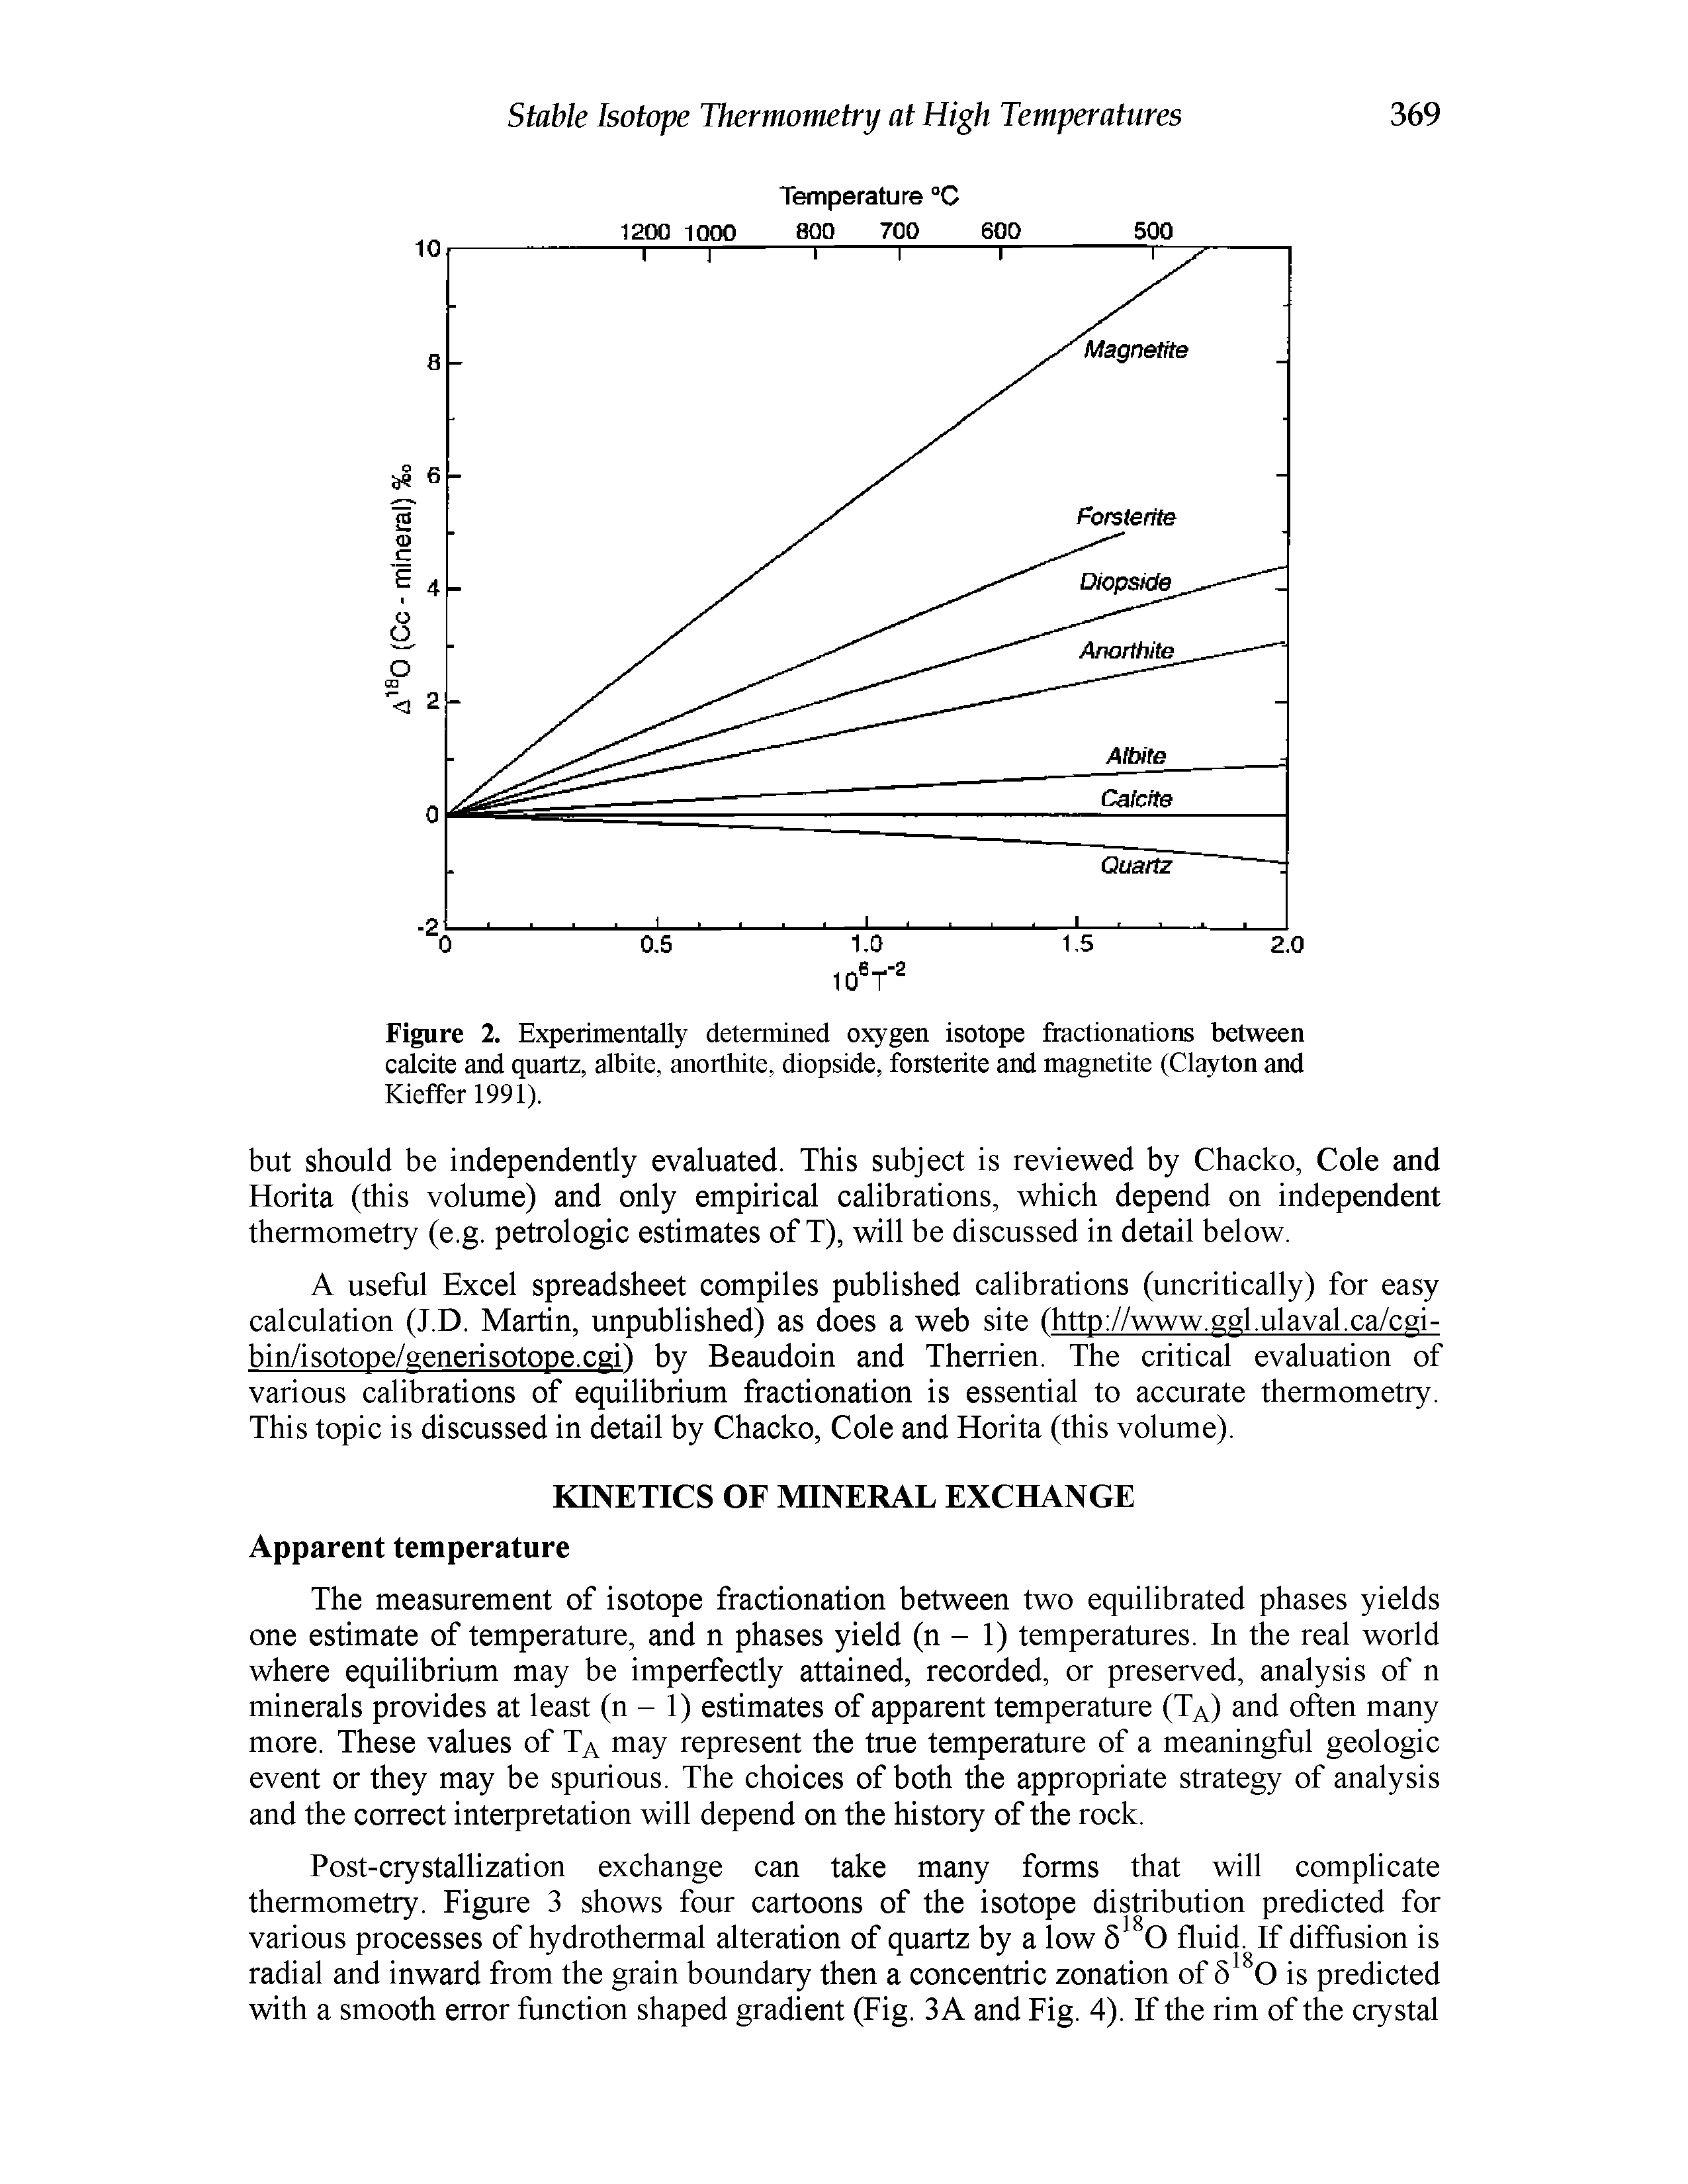 Figure 2. Experimentally determined oxygen isotope fractionations between calcite and quartz, albite, anorthite, diopside, forsterite and magnetite (Clayton and Kieffer 1991).